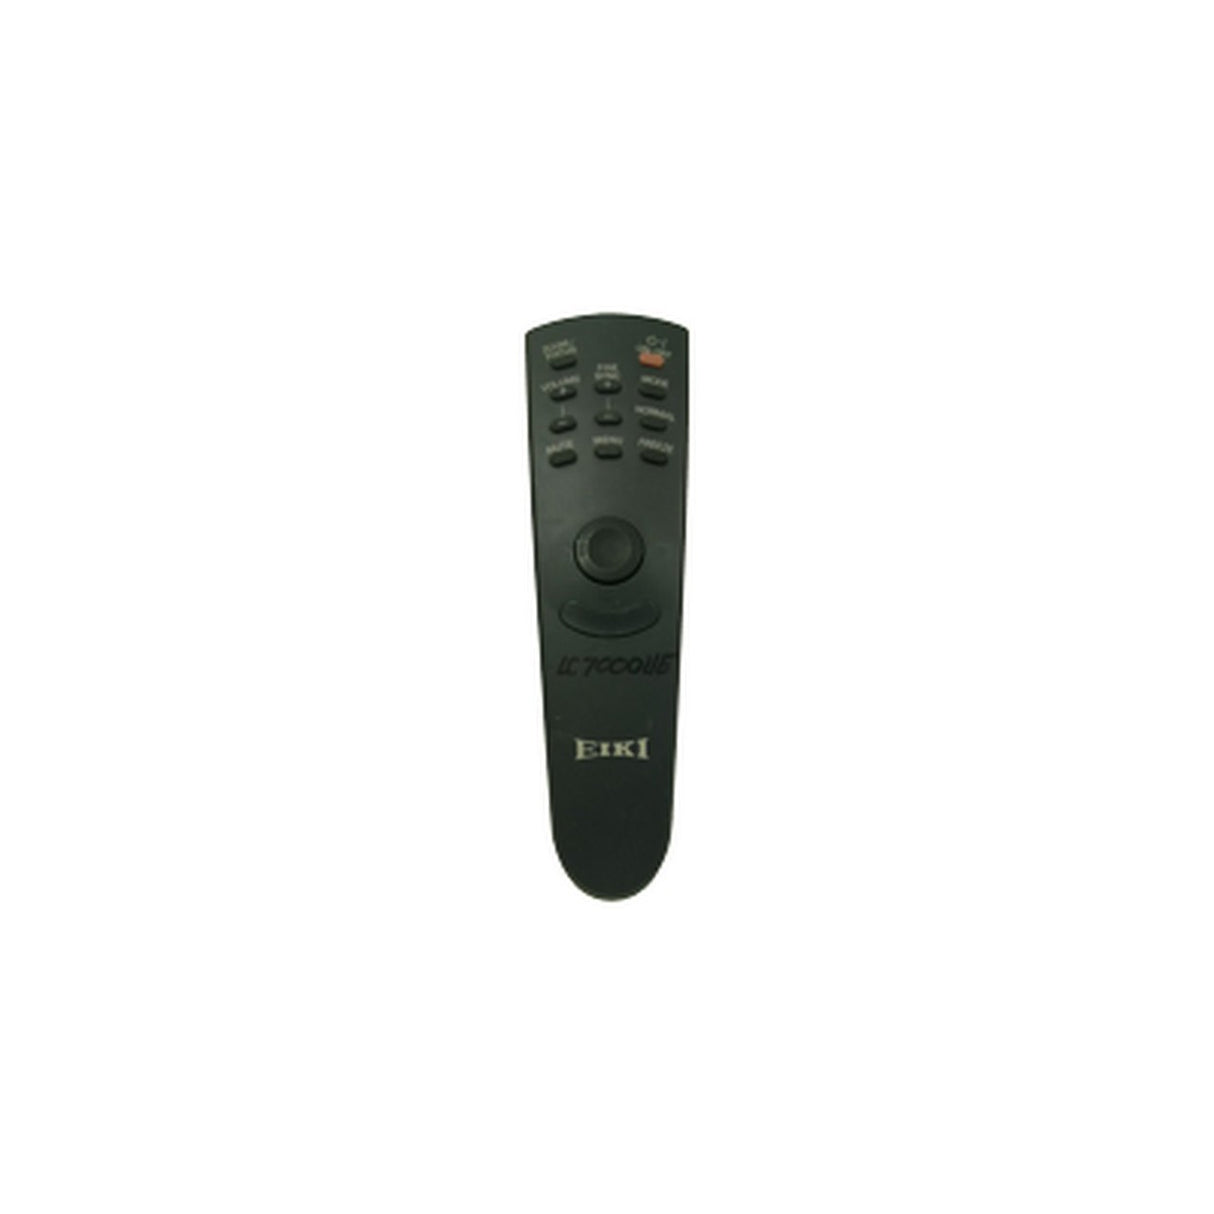 Eiki 645 024 8436 | Infrared Only Projector Remote for LC-7000UE